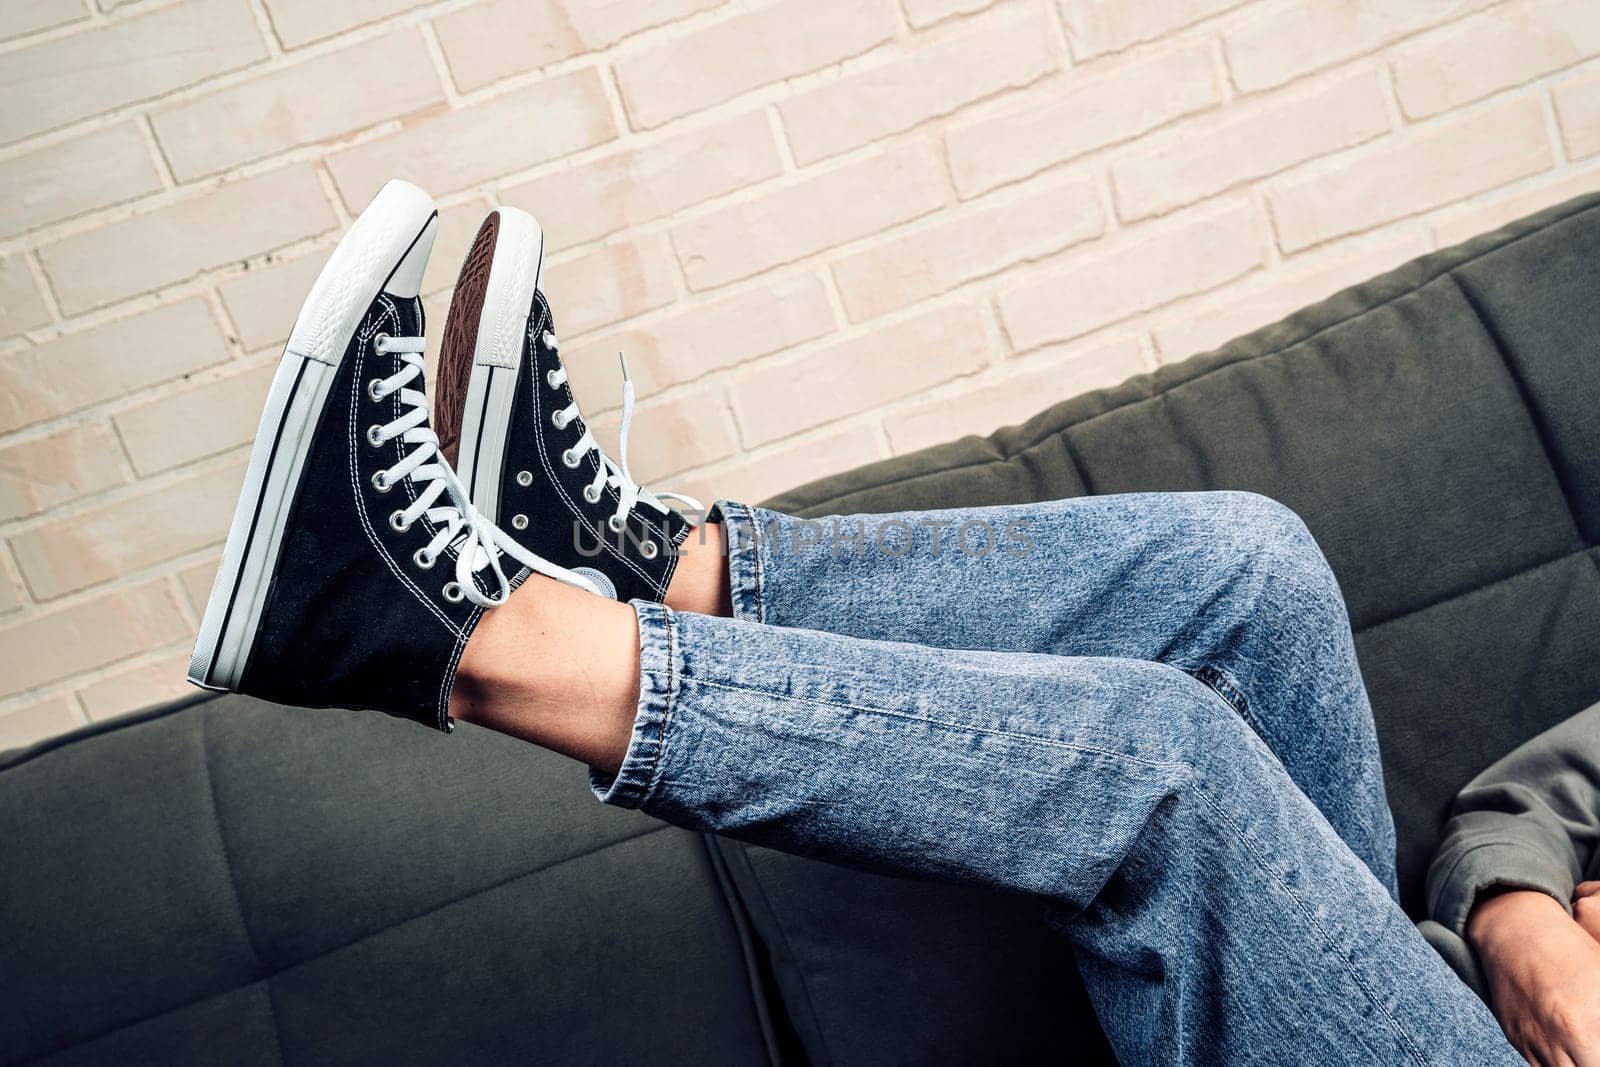 the girl's legs shod in classic sneakers. A sneakers on a girl's leg. Teenager's feet in casual new sneakers on the sofa close up image. Vintage style. concept image. Female feet in jeans and sports shoes